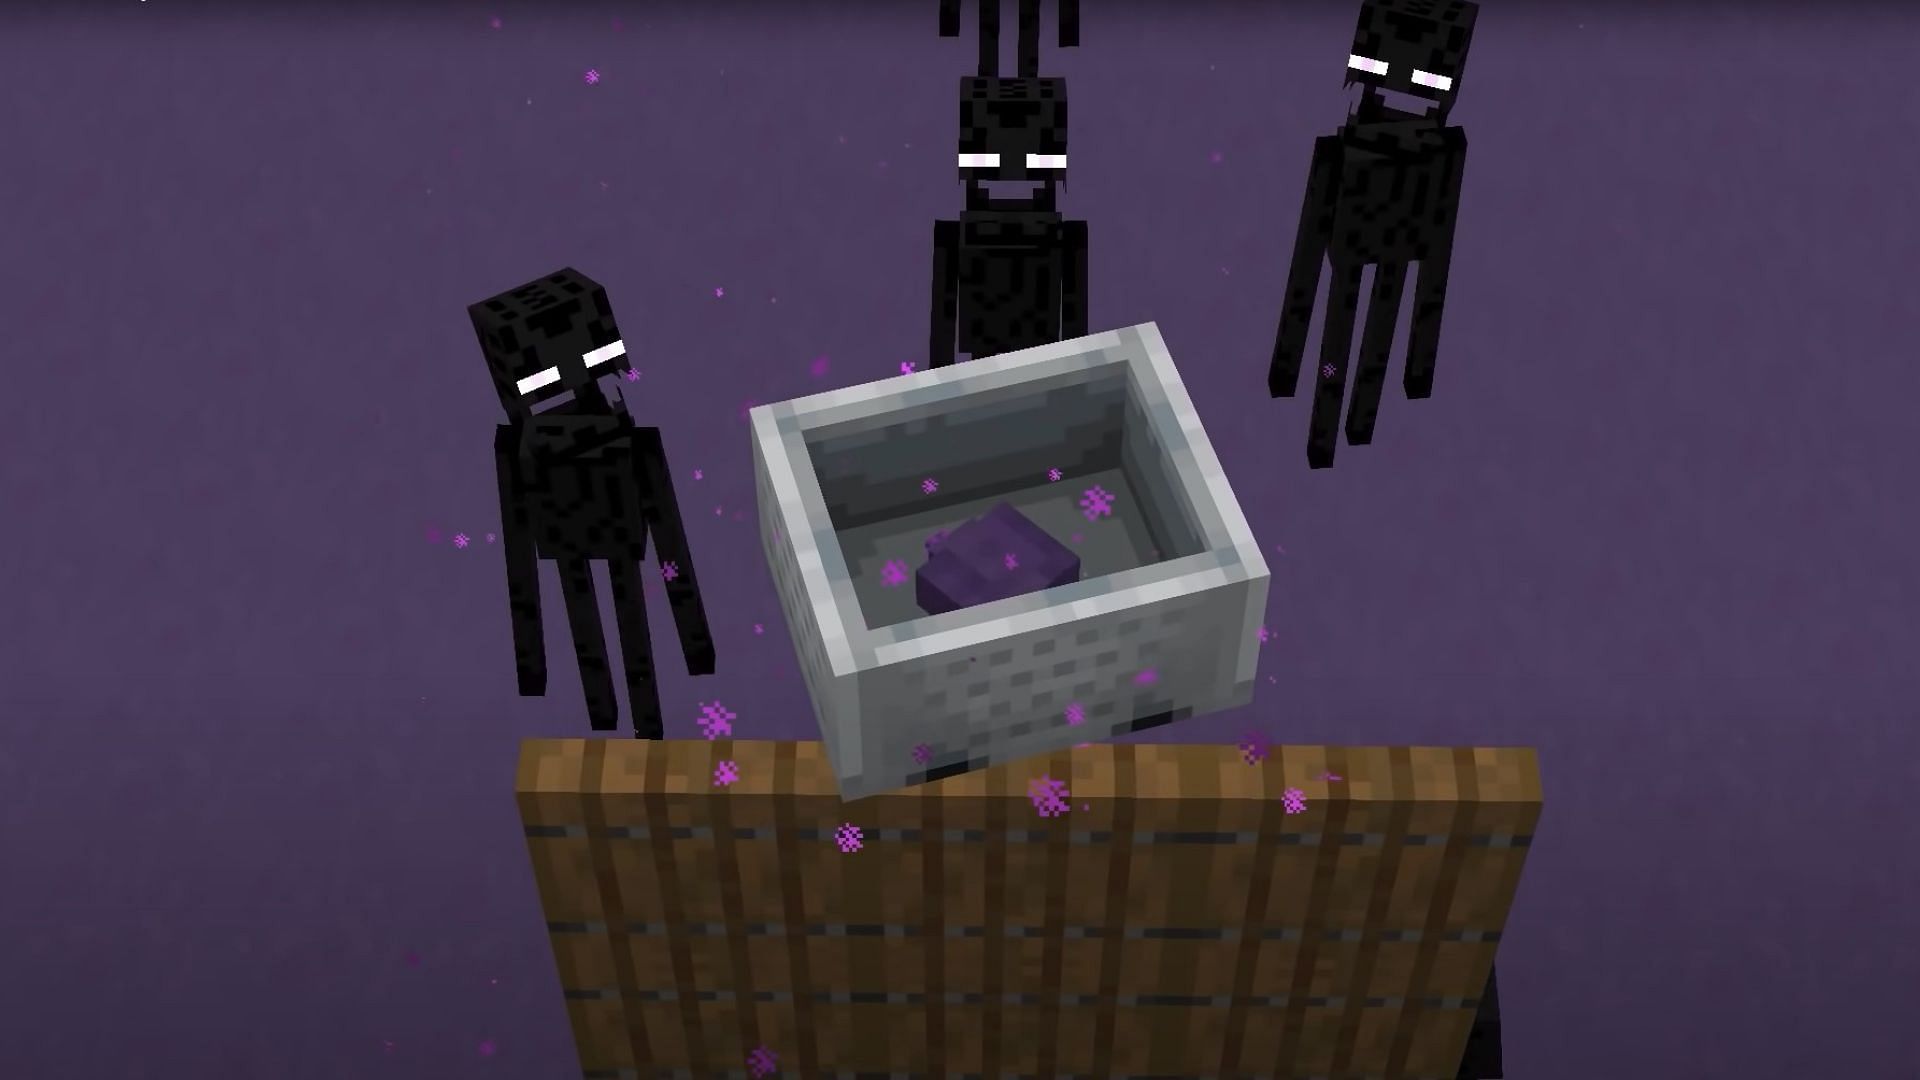 Endermite will satisfy you